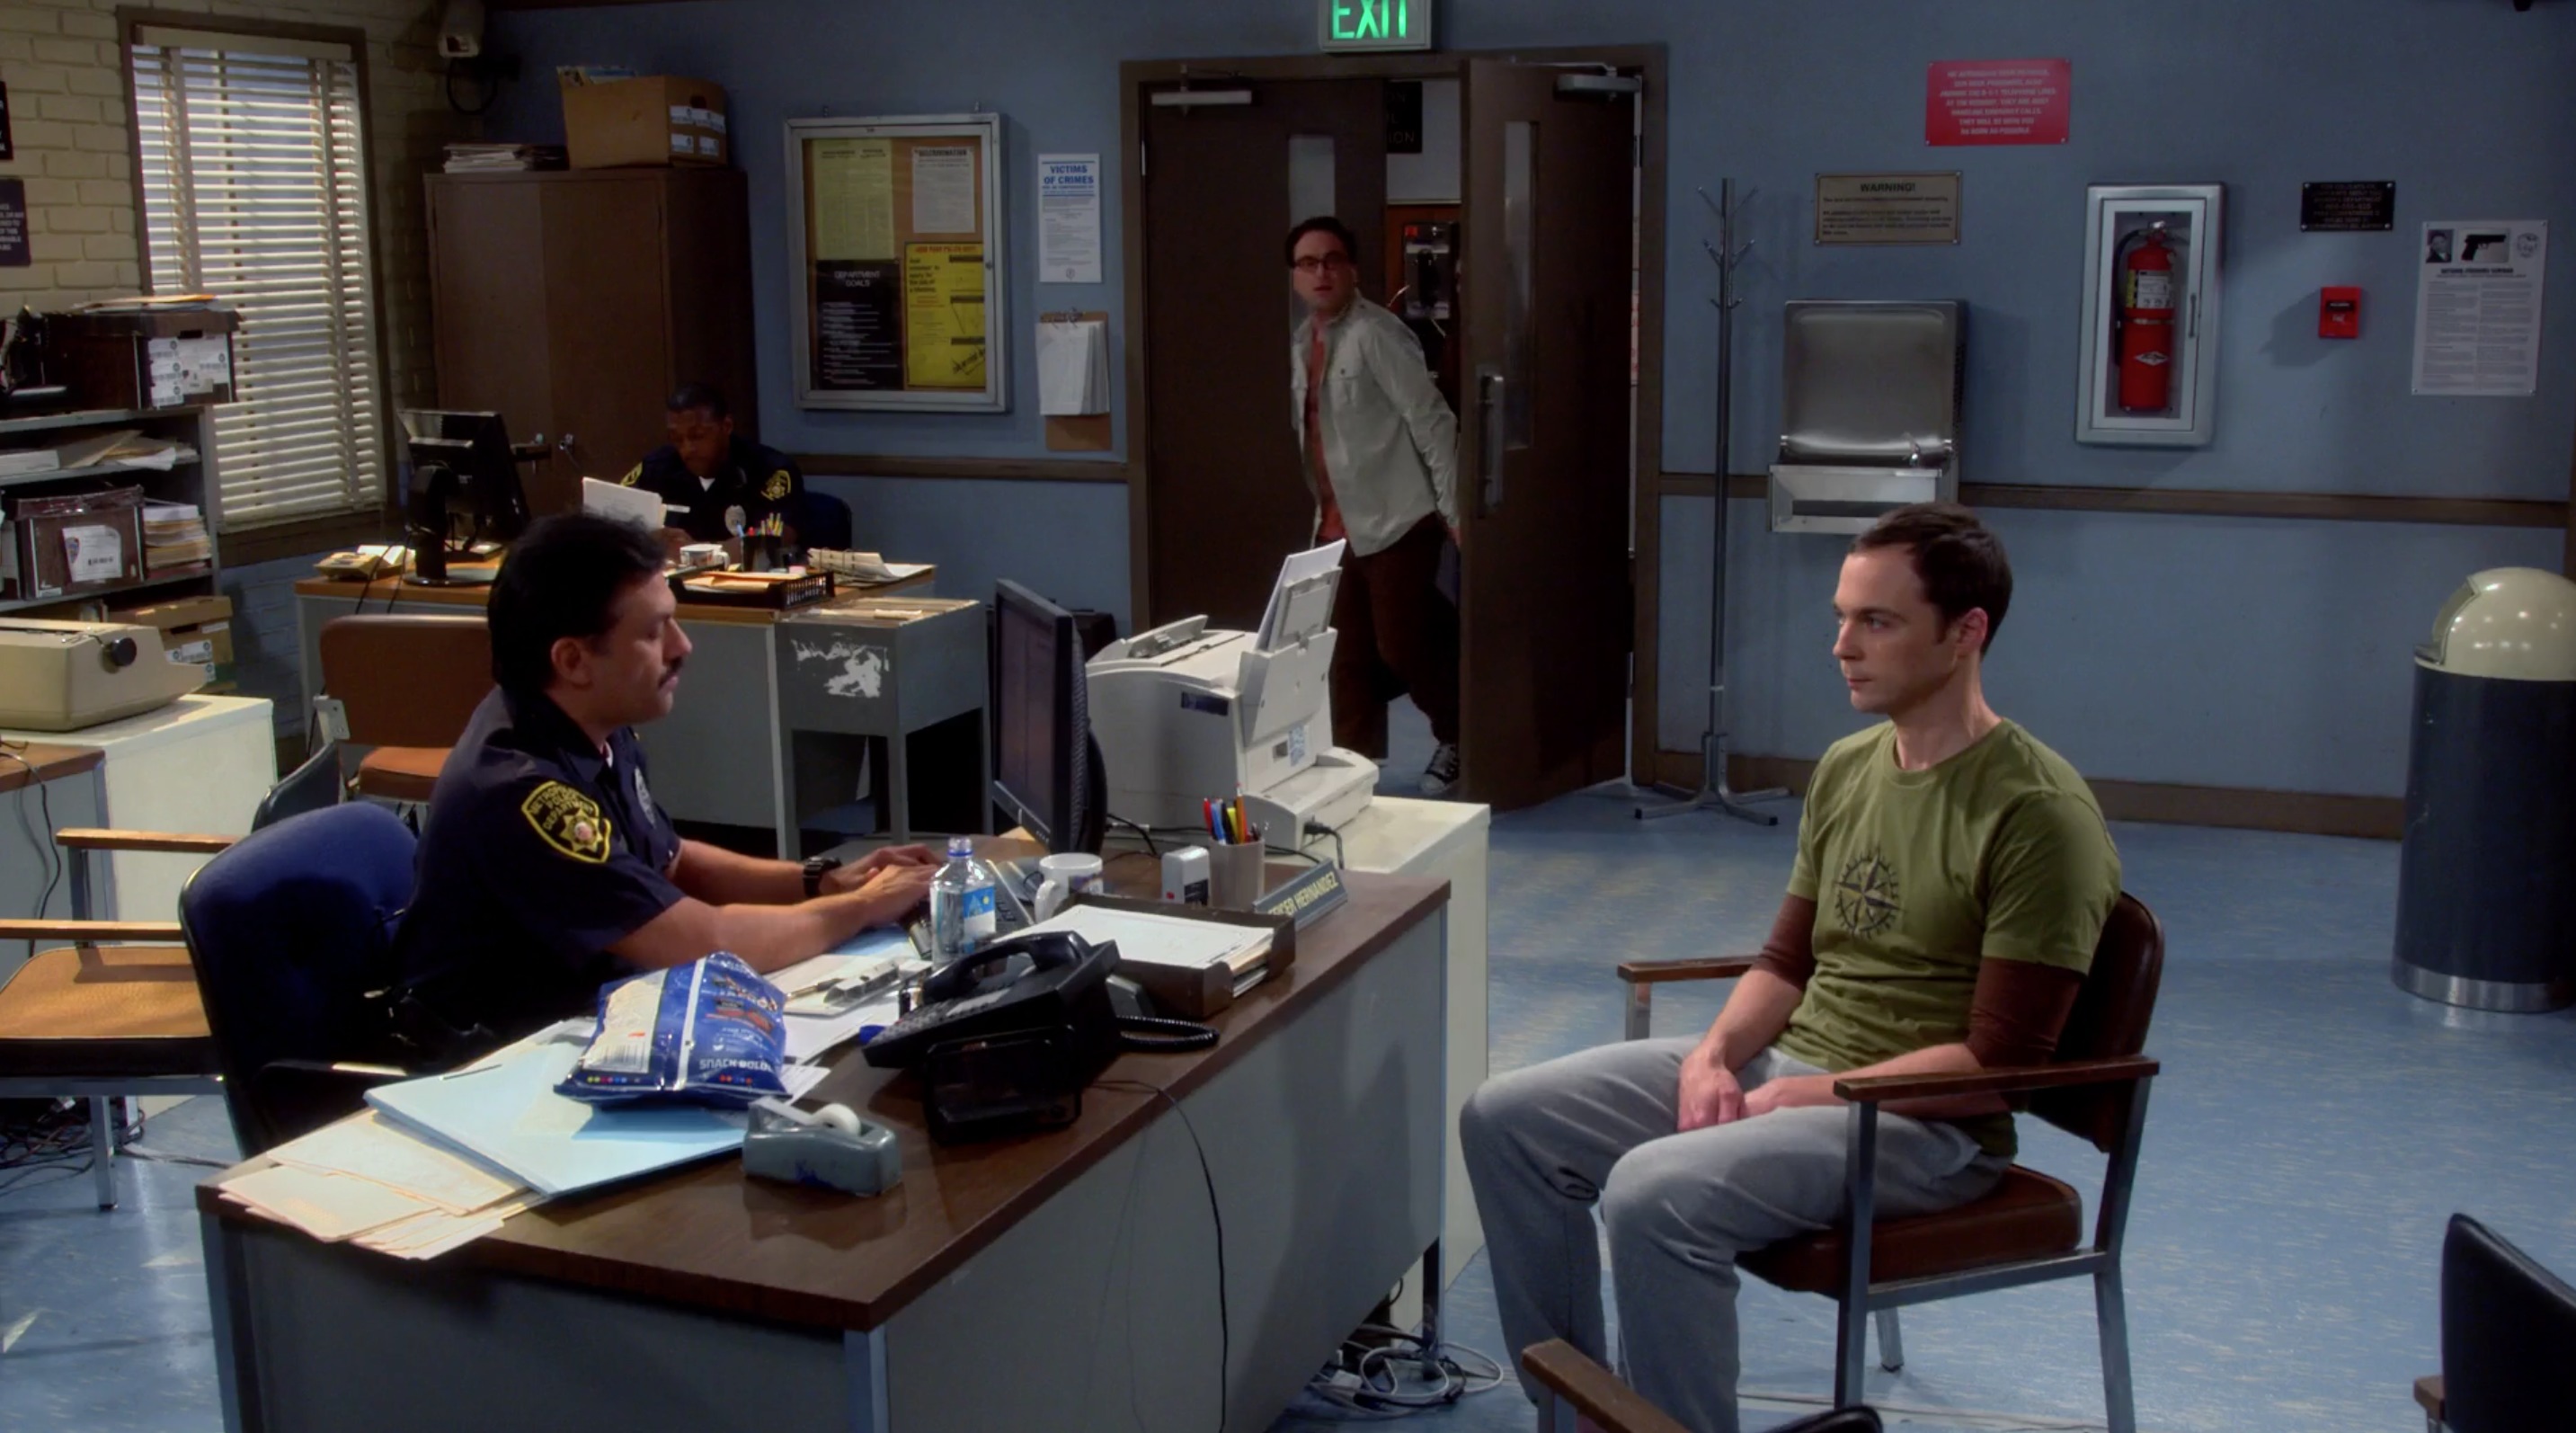 Still of David Barrera, Jim Parsons and Johnny Galecki in The Big Bang Theory and The Locomotion Interruption